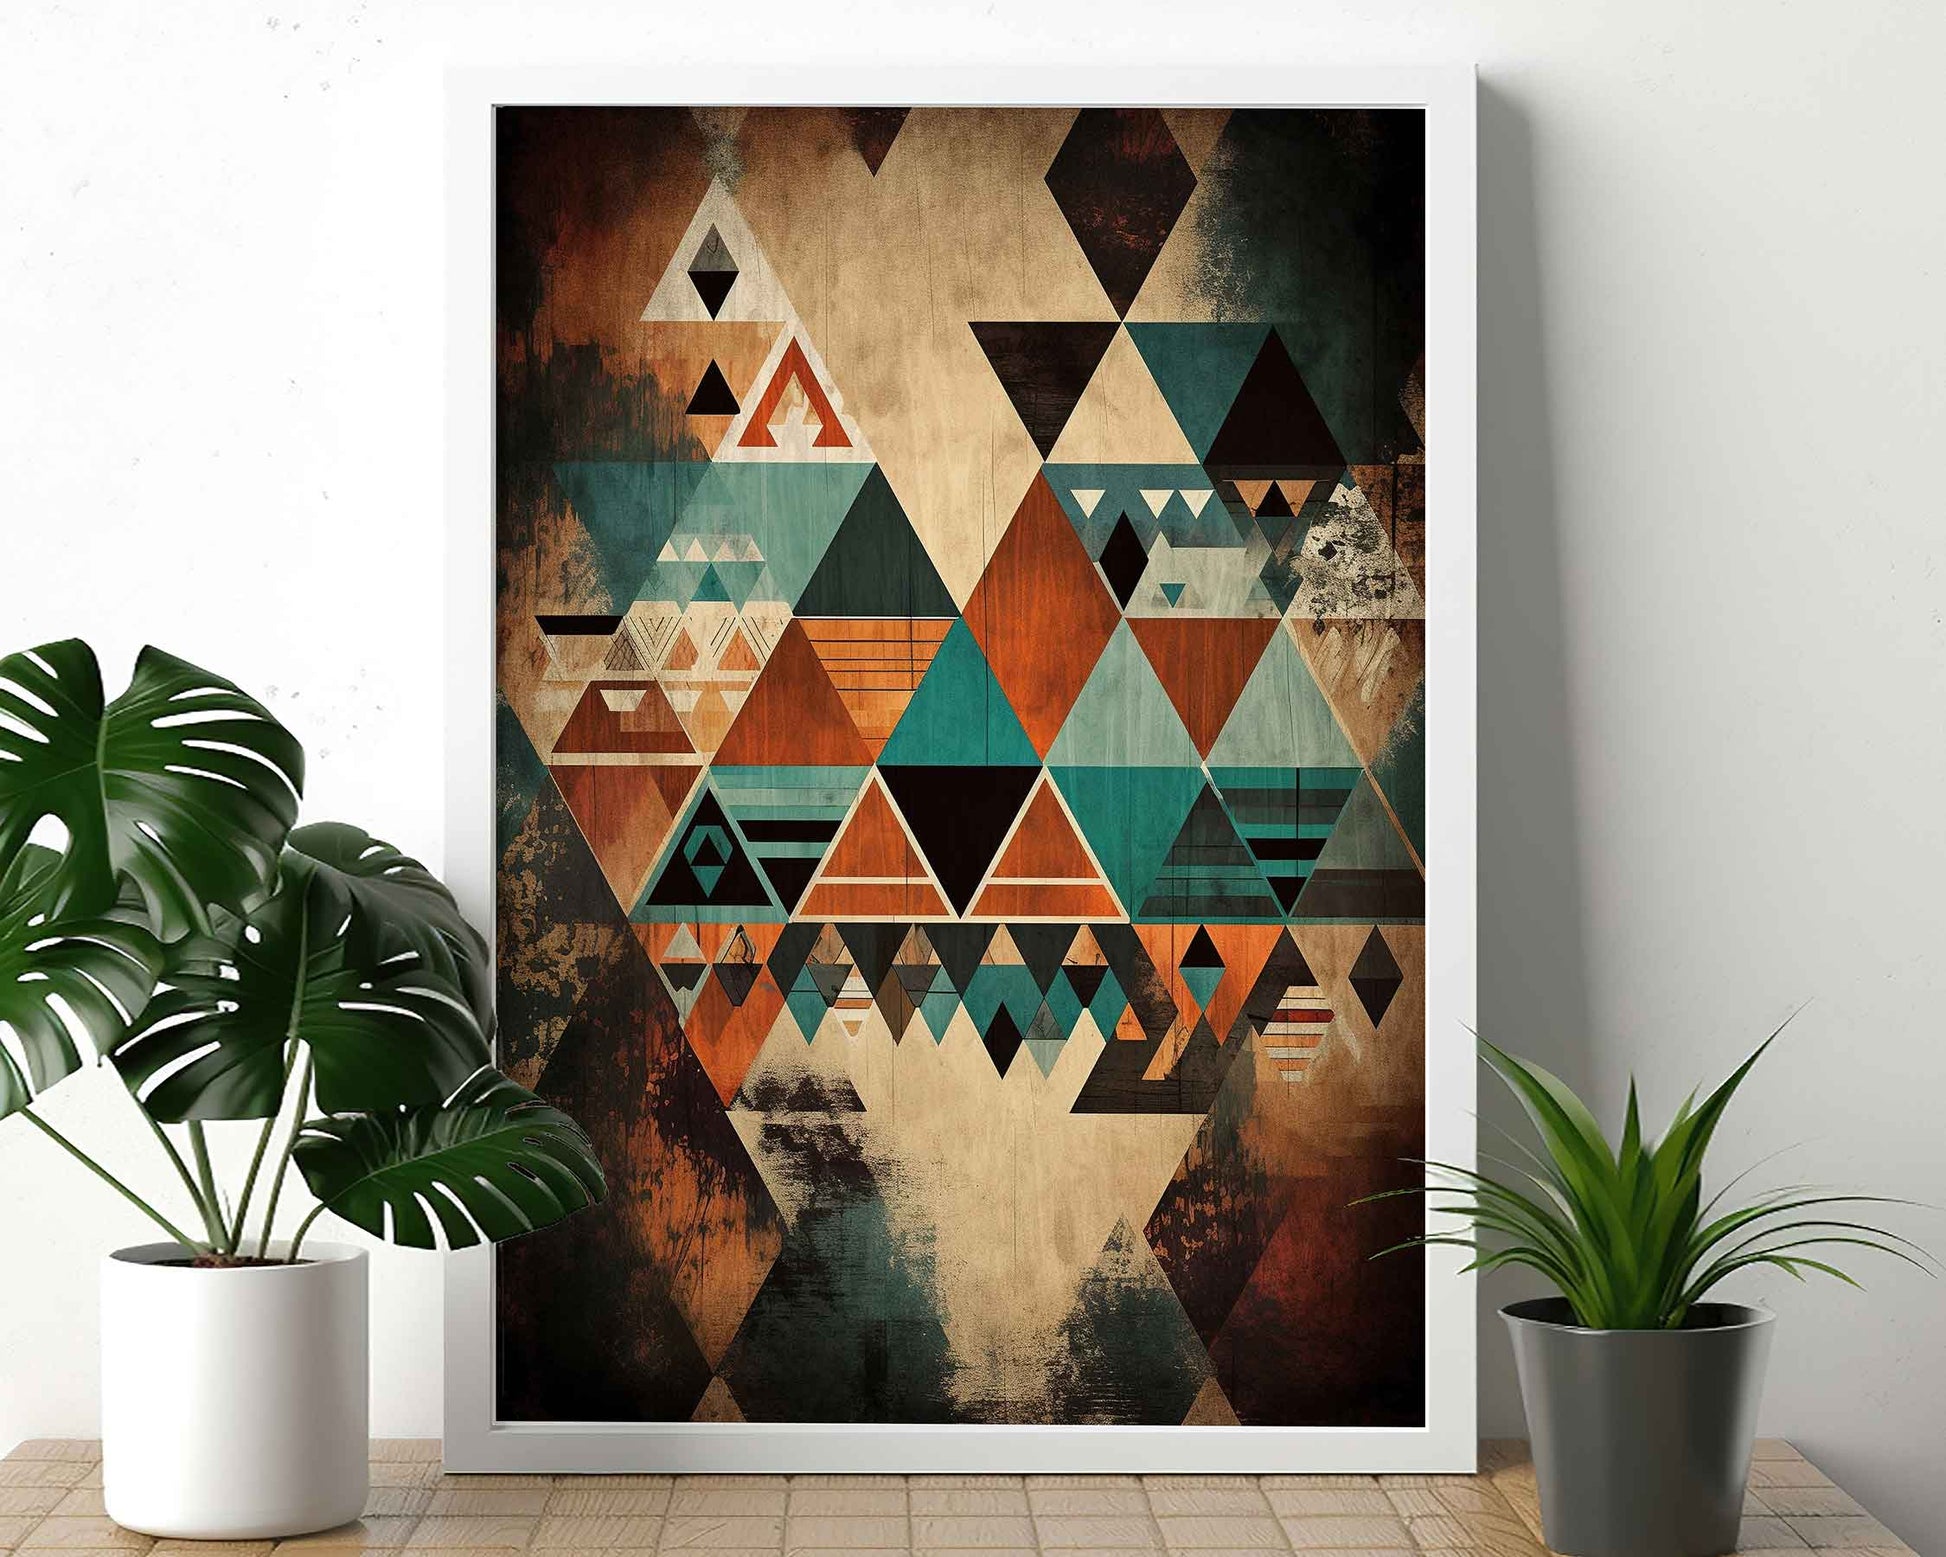 Framed Image of Boho Abstract Aztec Geometric Tribal Style Wall Art Poster Prints